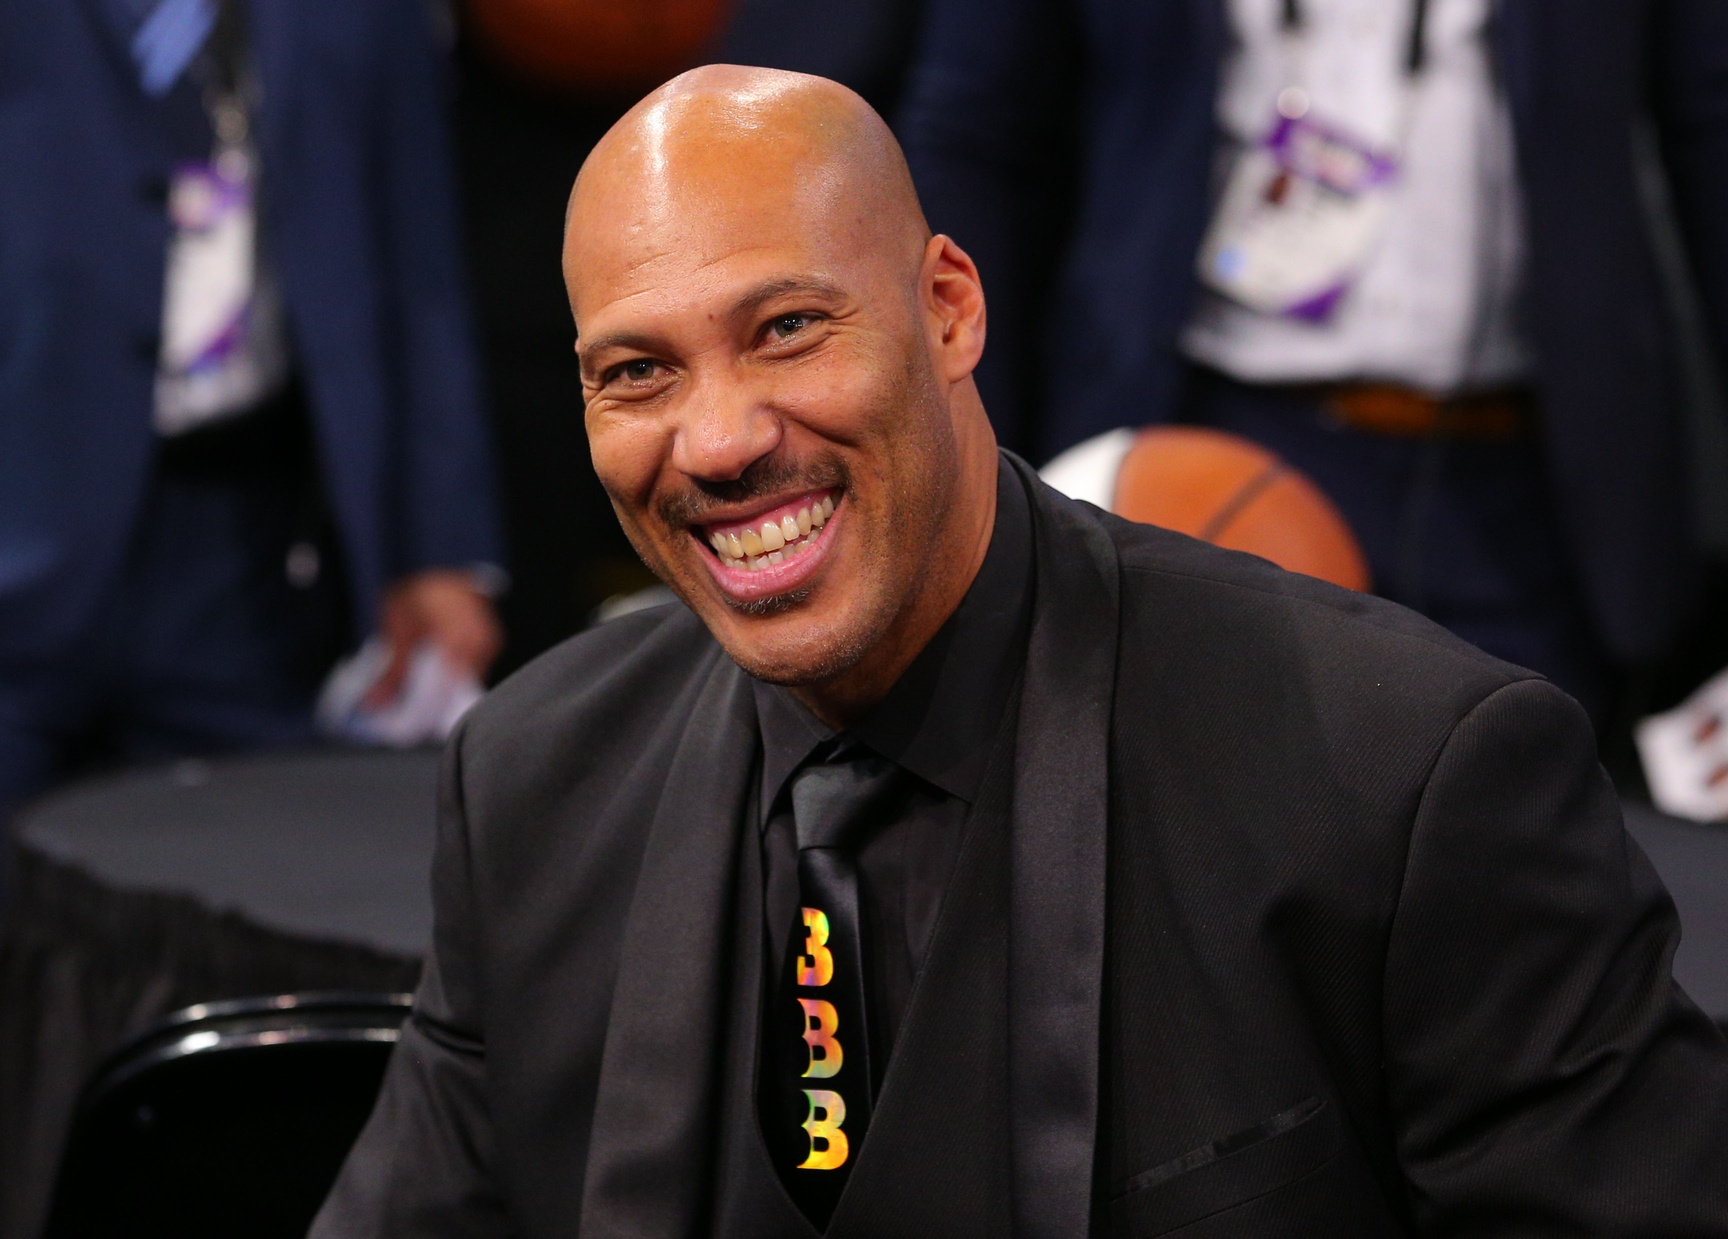 Lakers president Magic Johnson doesn't seem too worried about LaVar Ball.